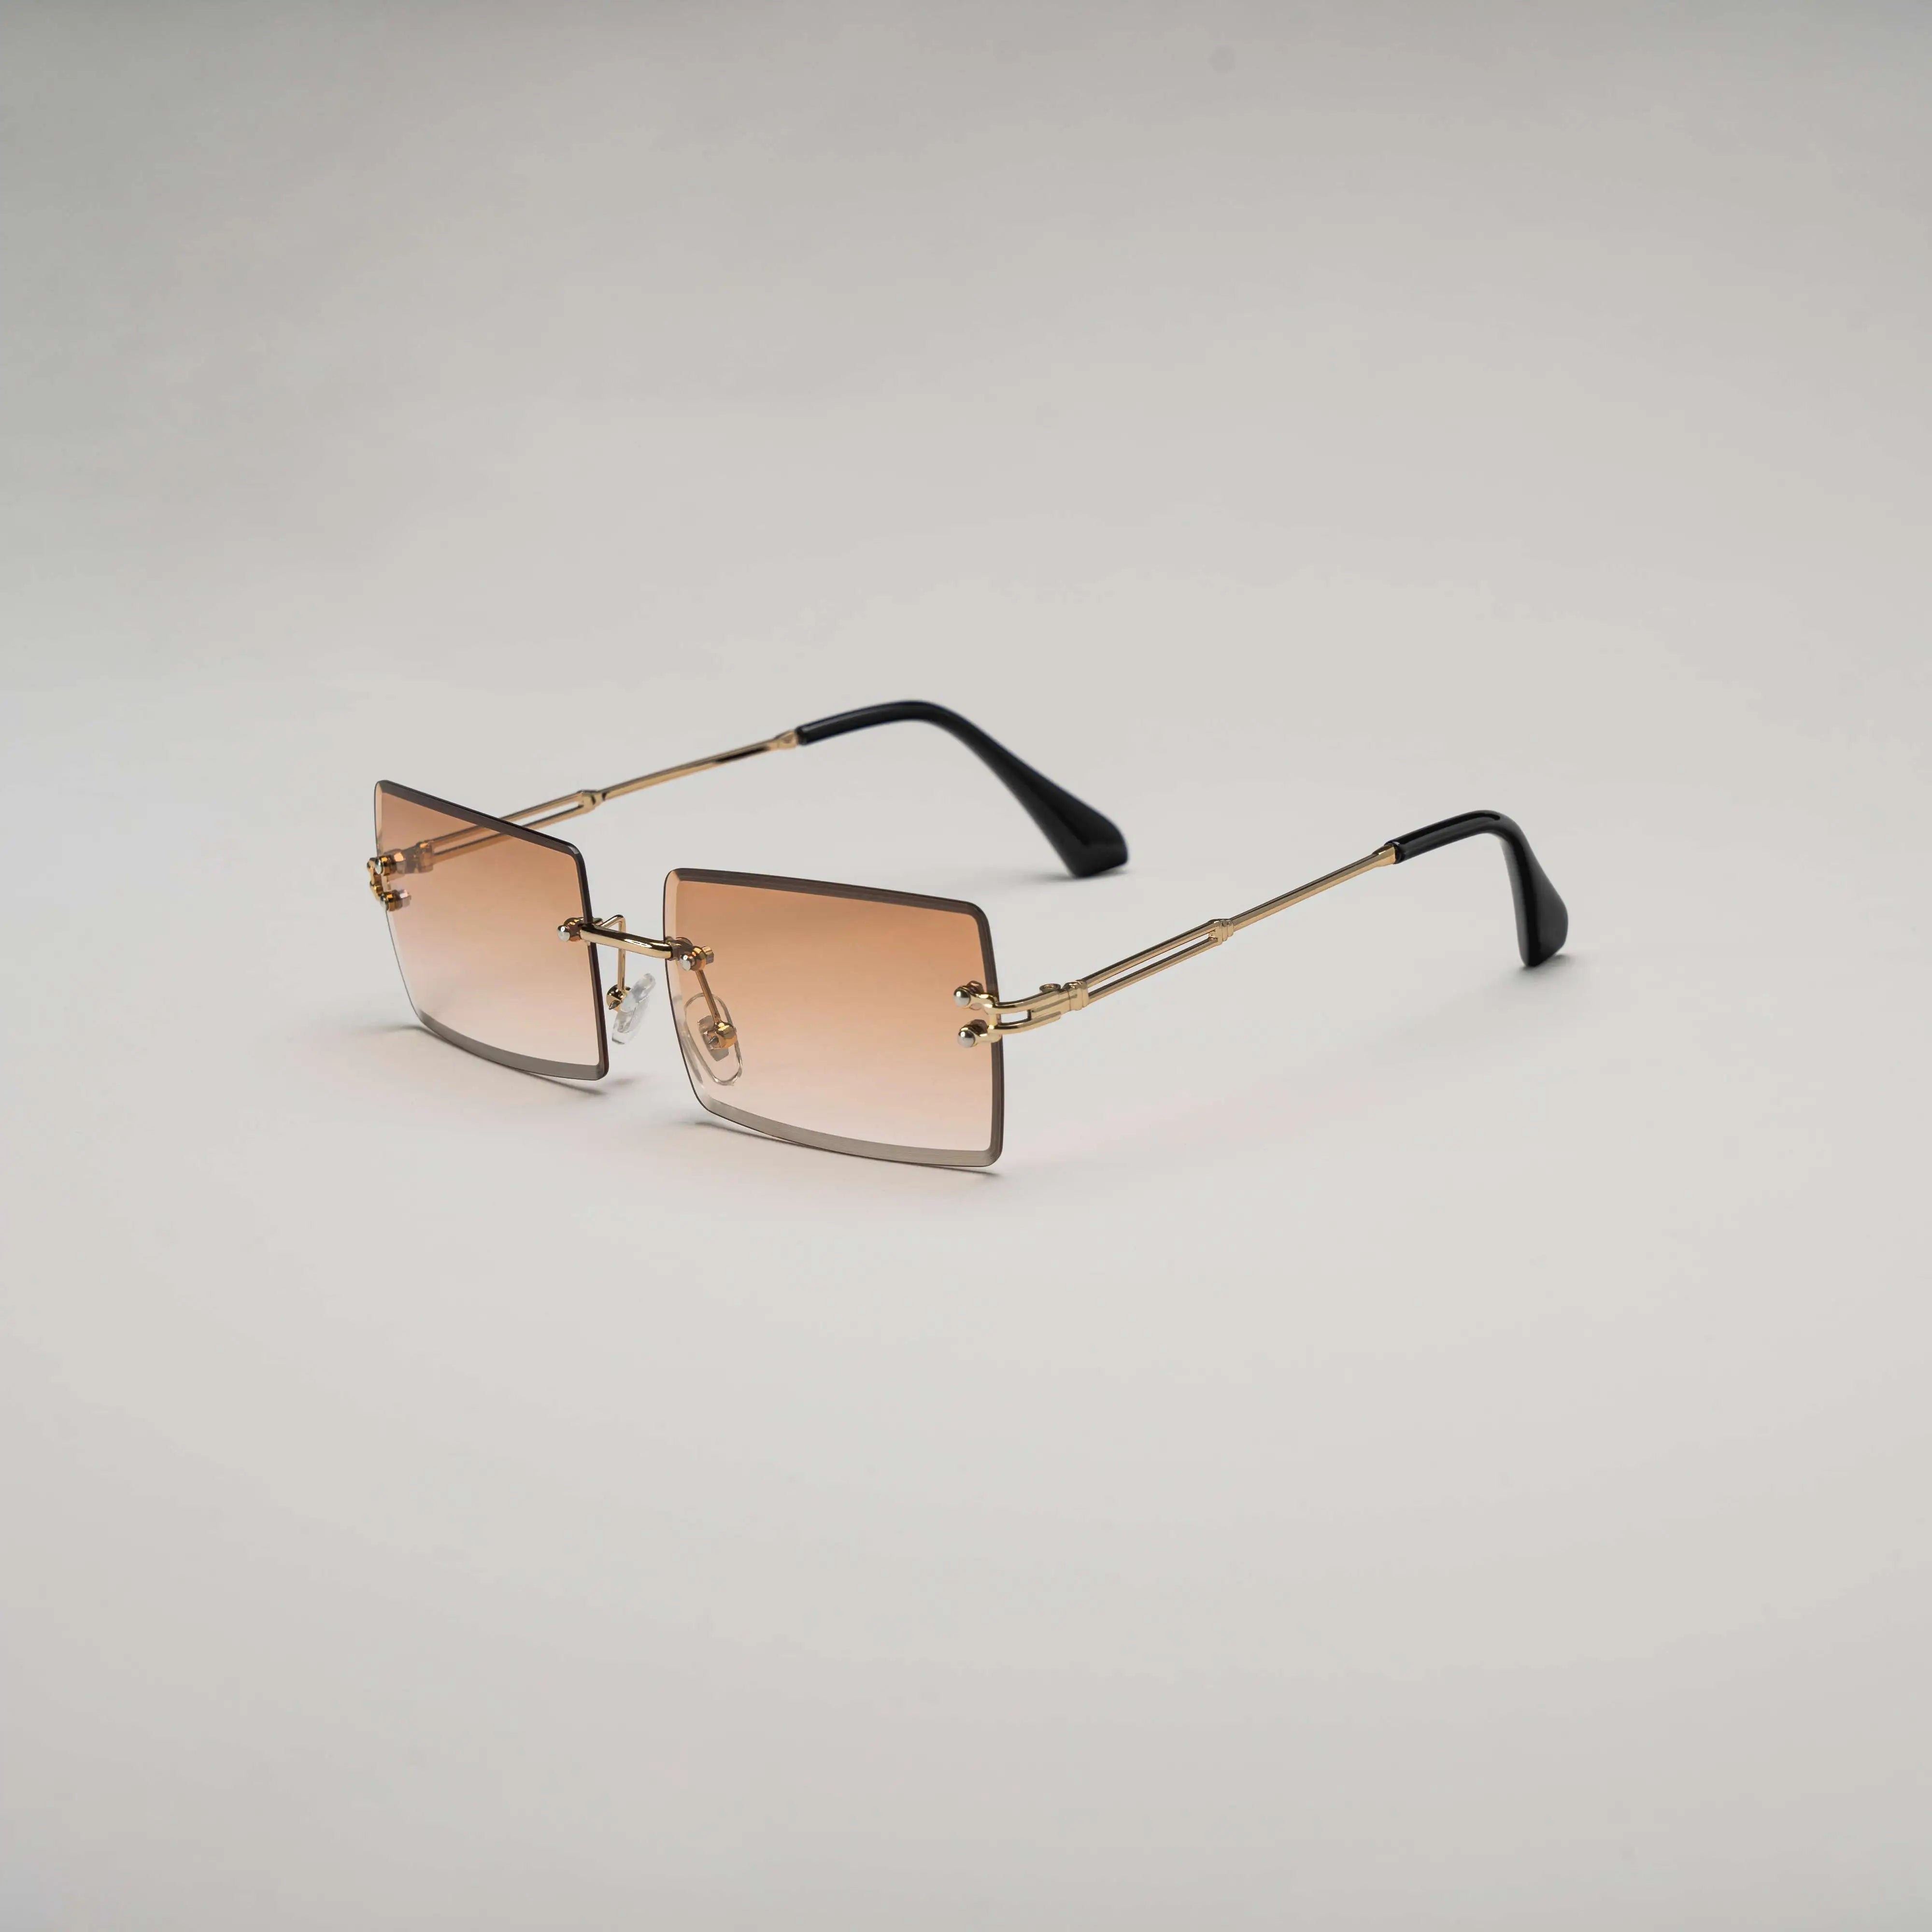 'Hennessy' Rimless Sunglasses in Brown & Gold